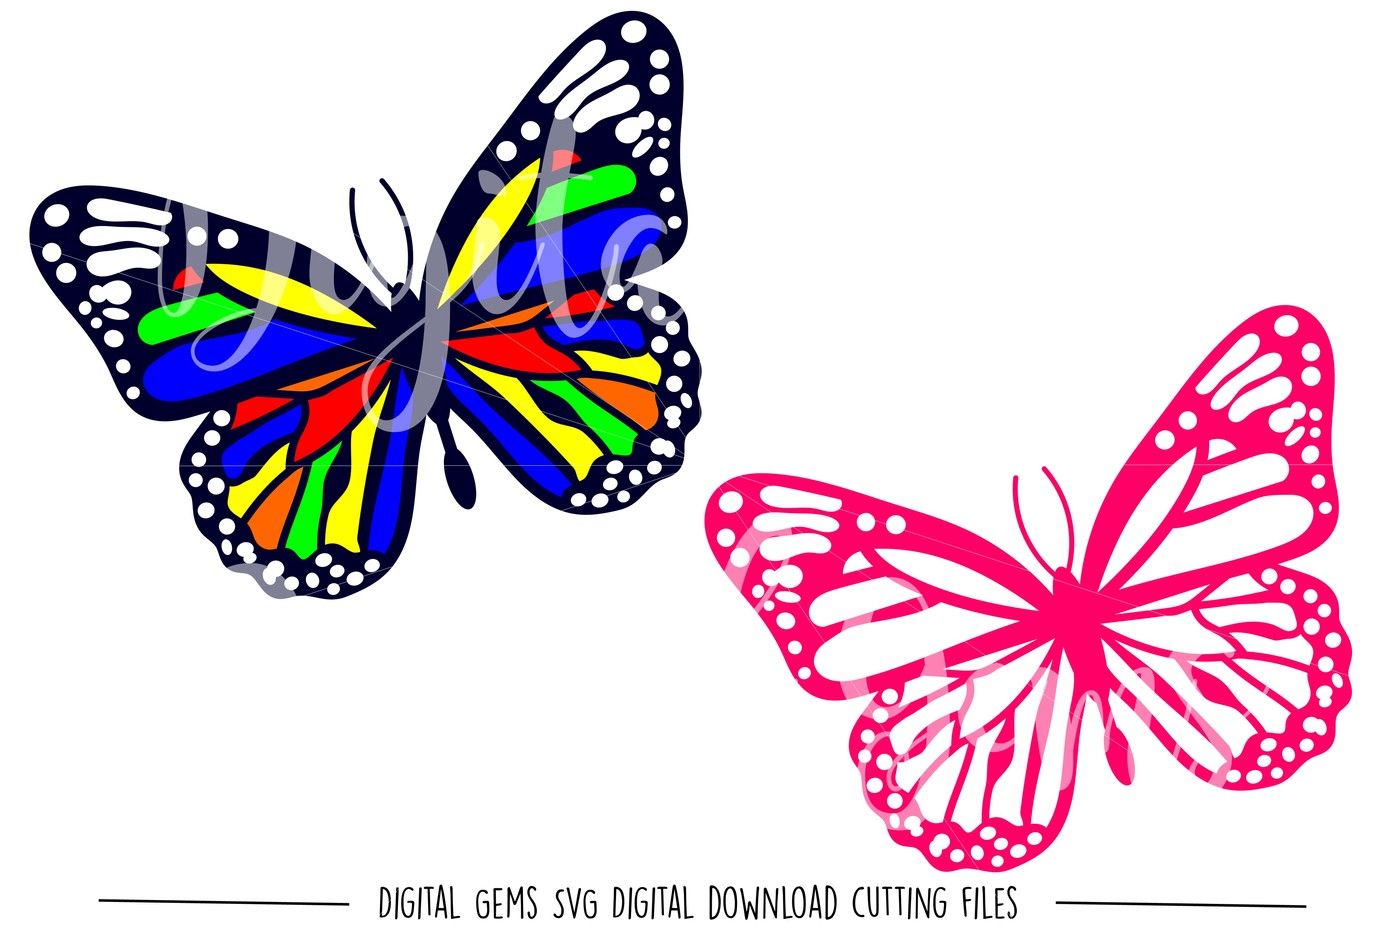 Download Fancy Butterfly Svg - Layered SVG Cut File - Find & download f...